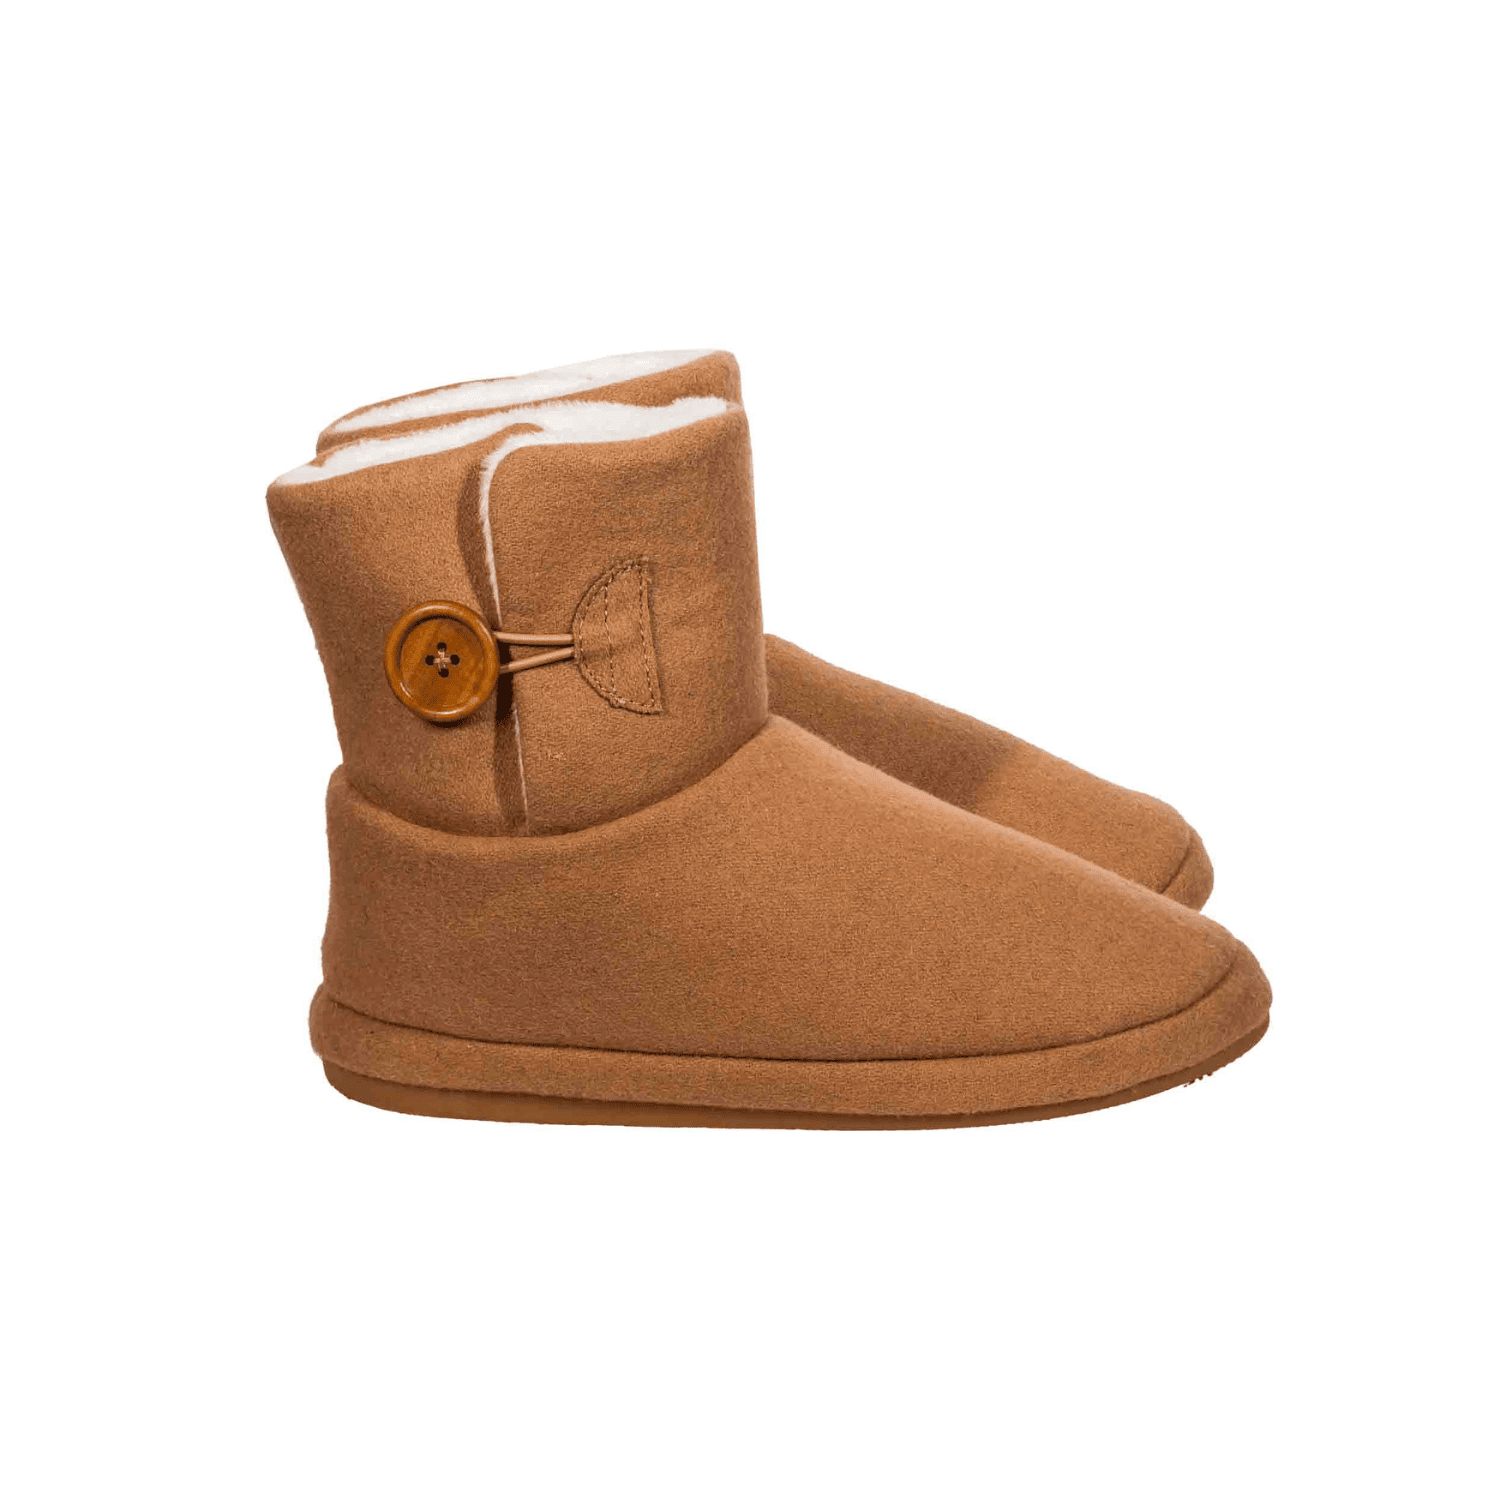 ARCH BOOTS - CHESTNUT